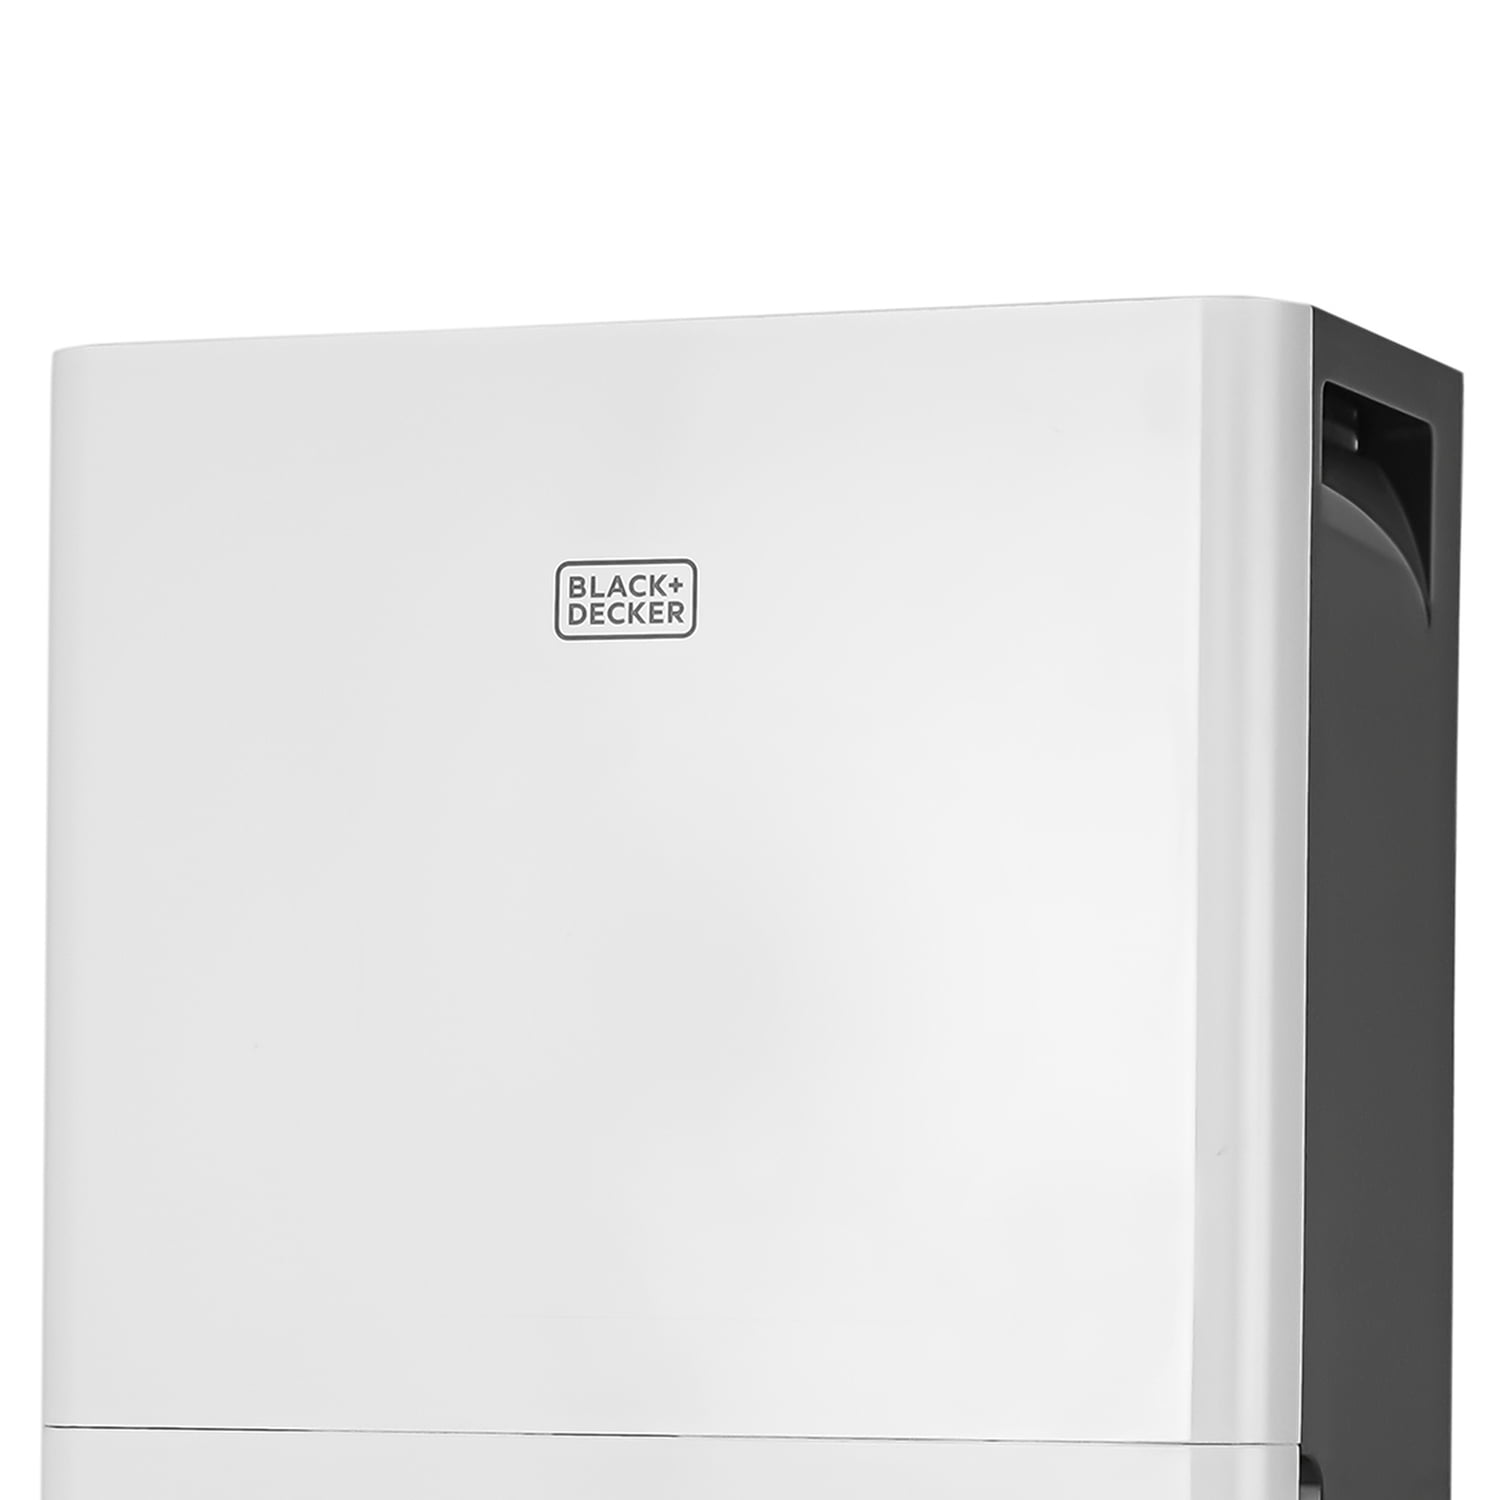 Black+Decker 4500 Sq. Ft. Dehumidifier For Large Spaces/Basements Energy  Star Certified BD50MWSA BD50MWSA, Color: White - JCPenney